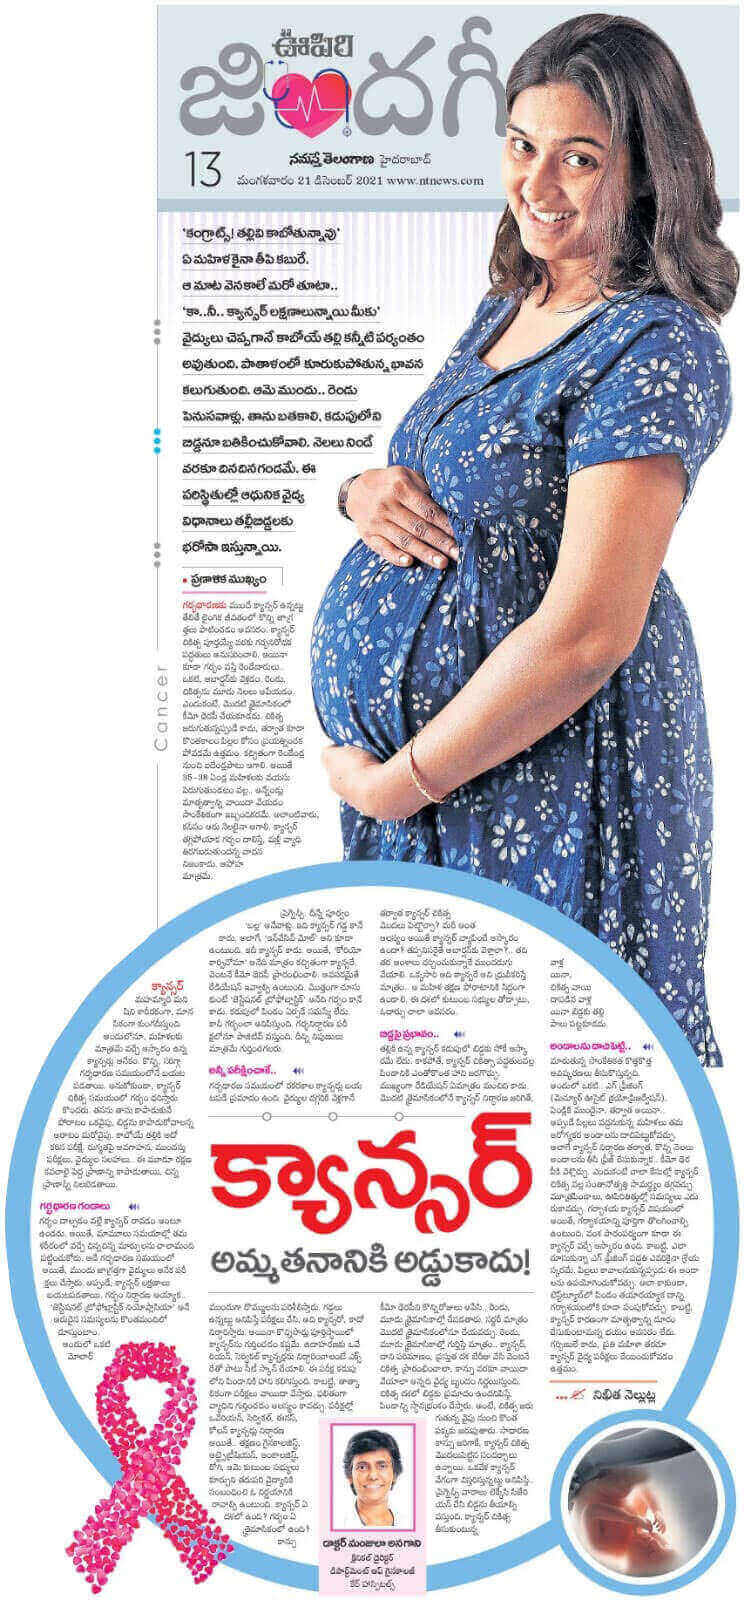 Article on Cancer in Pregnant Women by Dr. Manjula Anagani - Clinical Director and HOD - Obstetrics & Gynecology